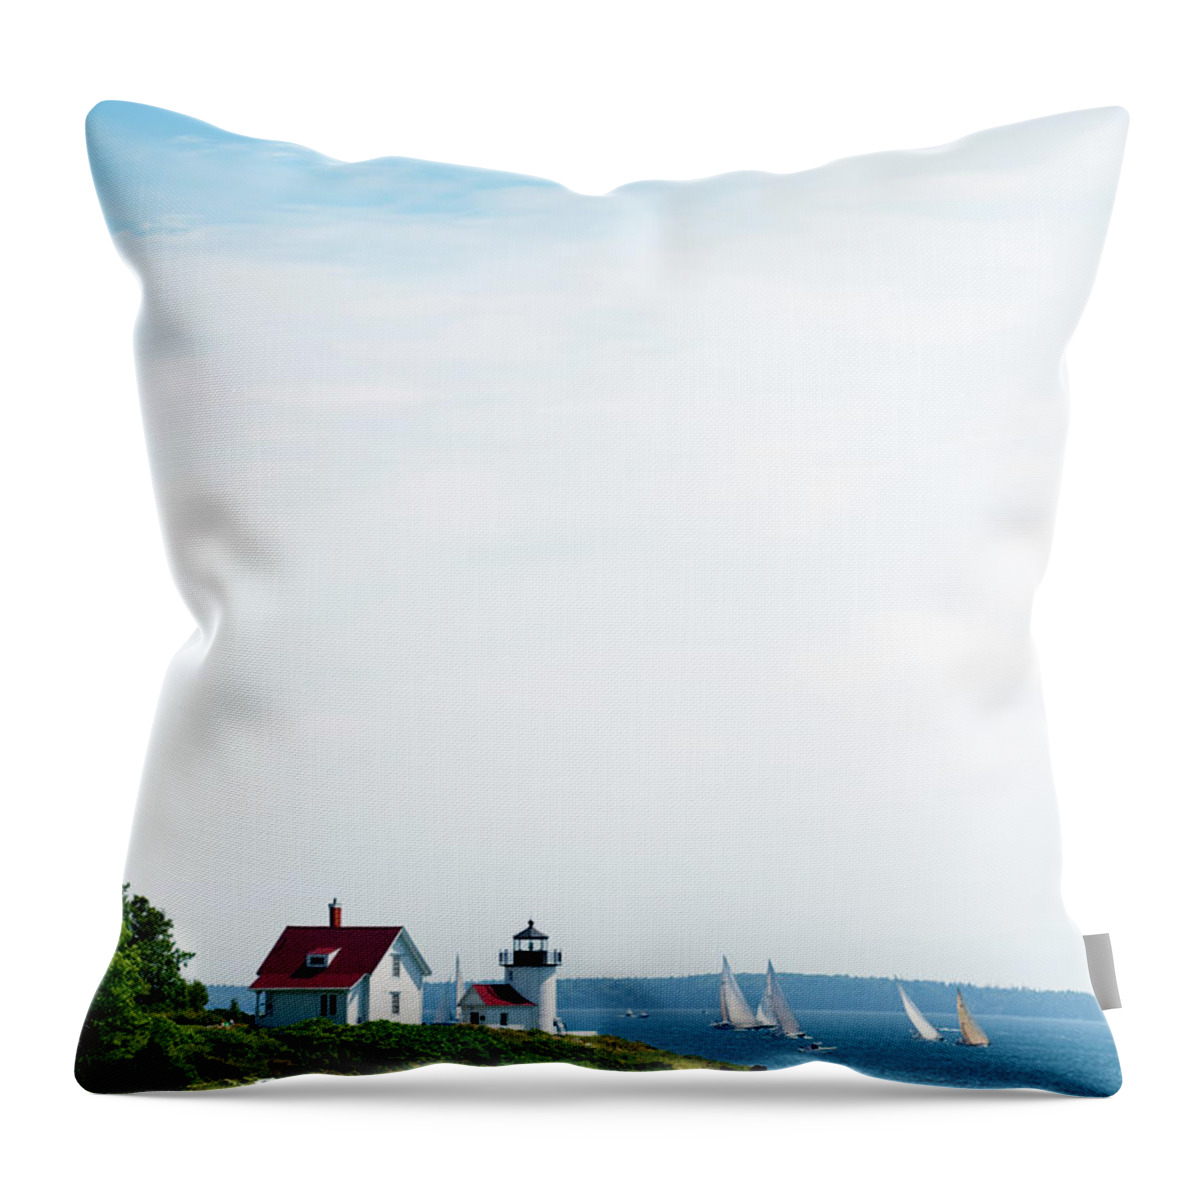 Camden Throw Pillow featuring the photograph Curtis Head Light In Camden, Me With by Gregobagel